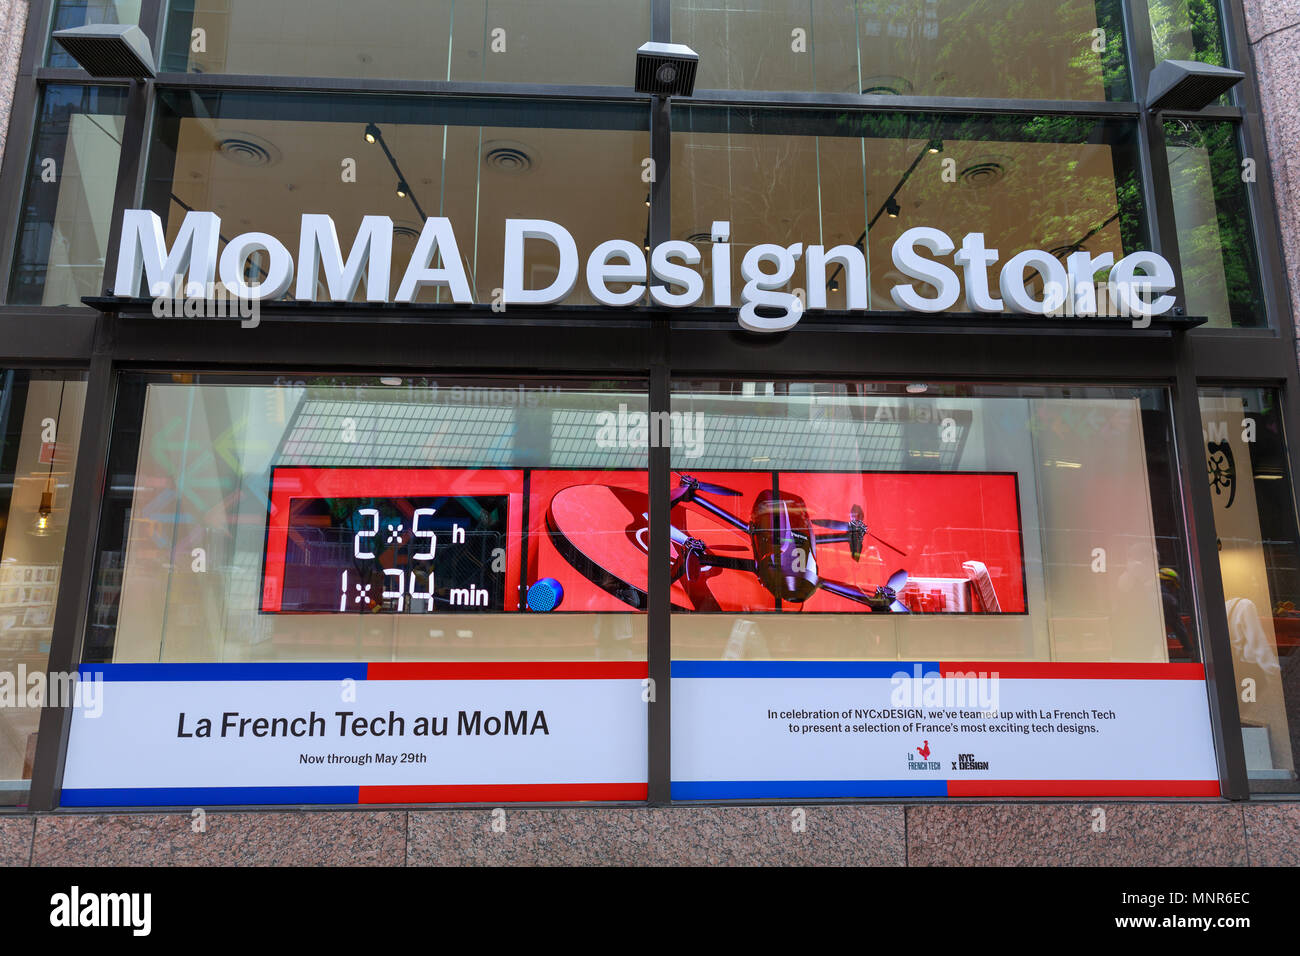 Moma Sign High Resolution Stock Photography and Images - Alamy